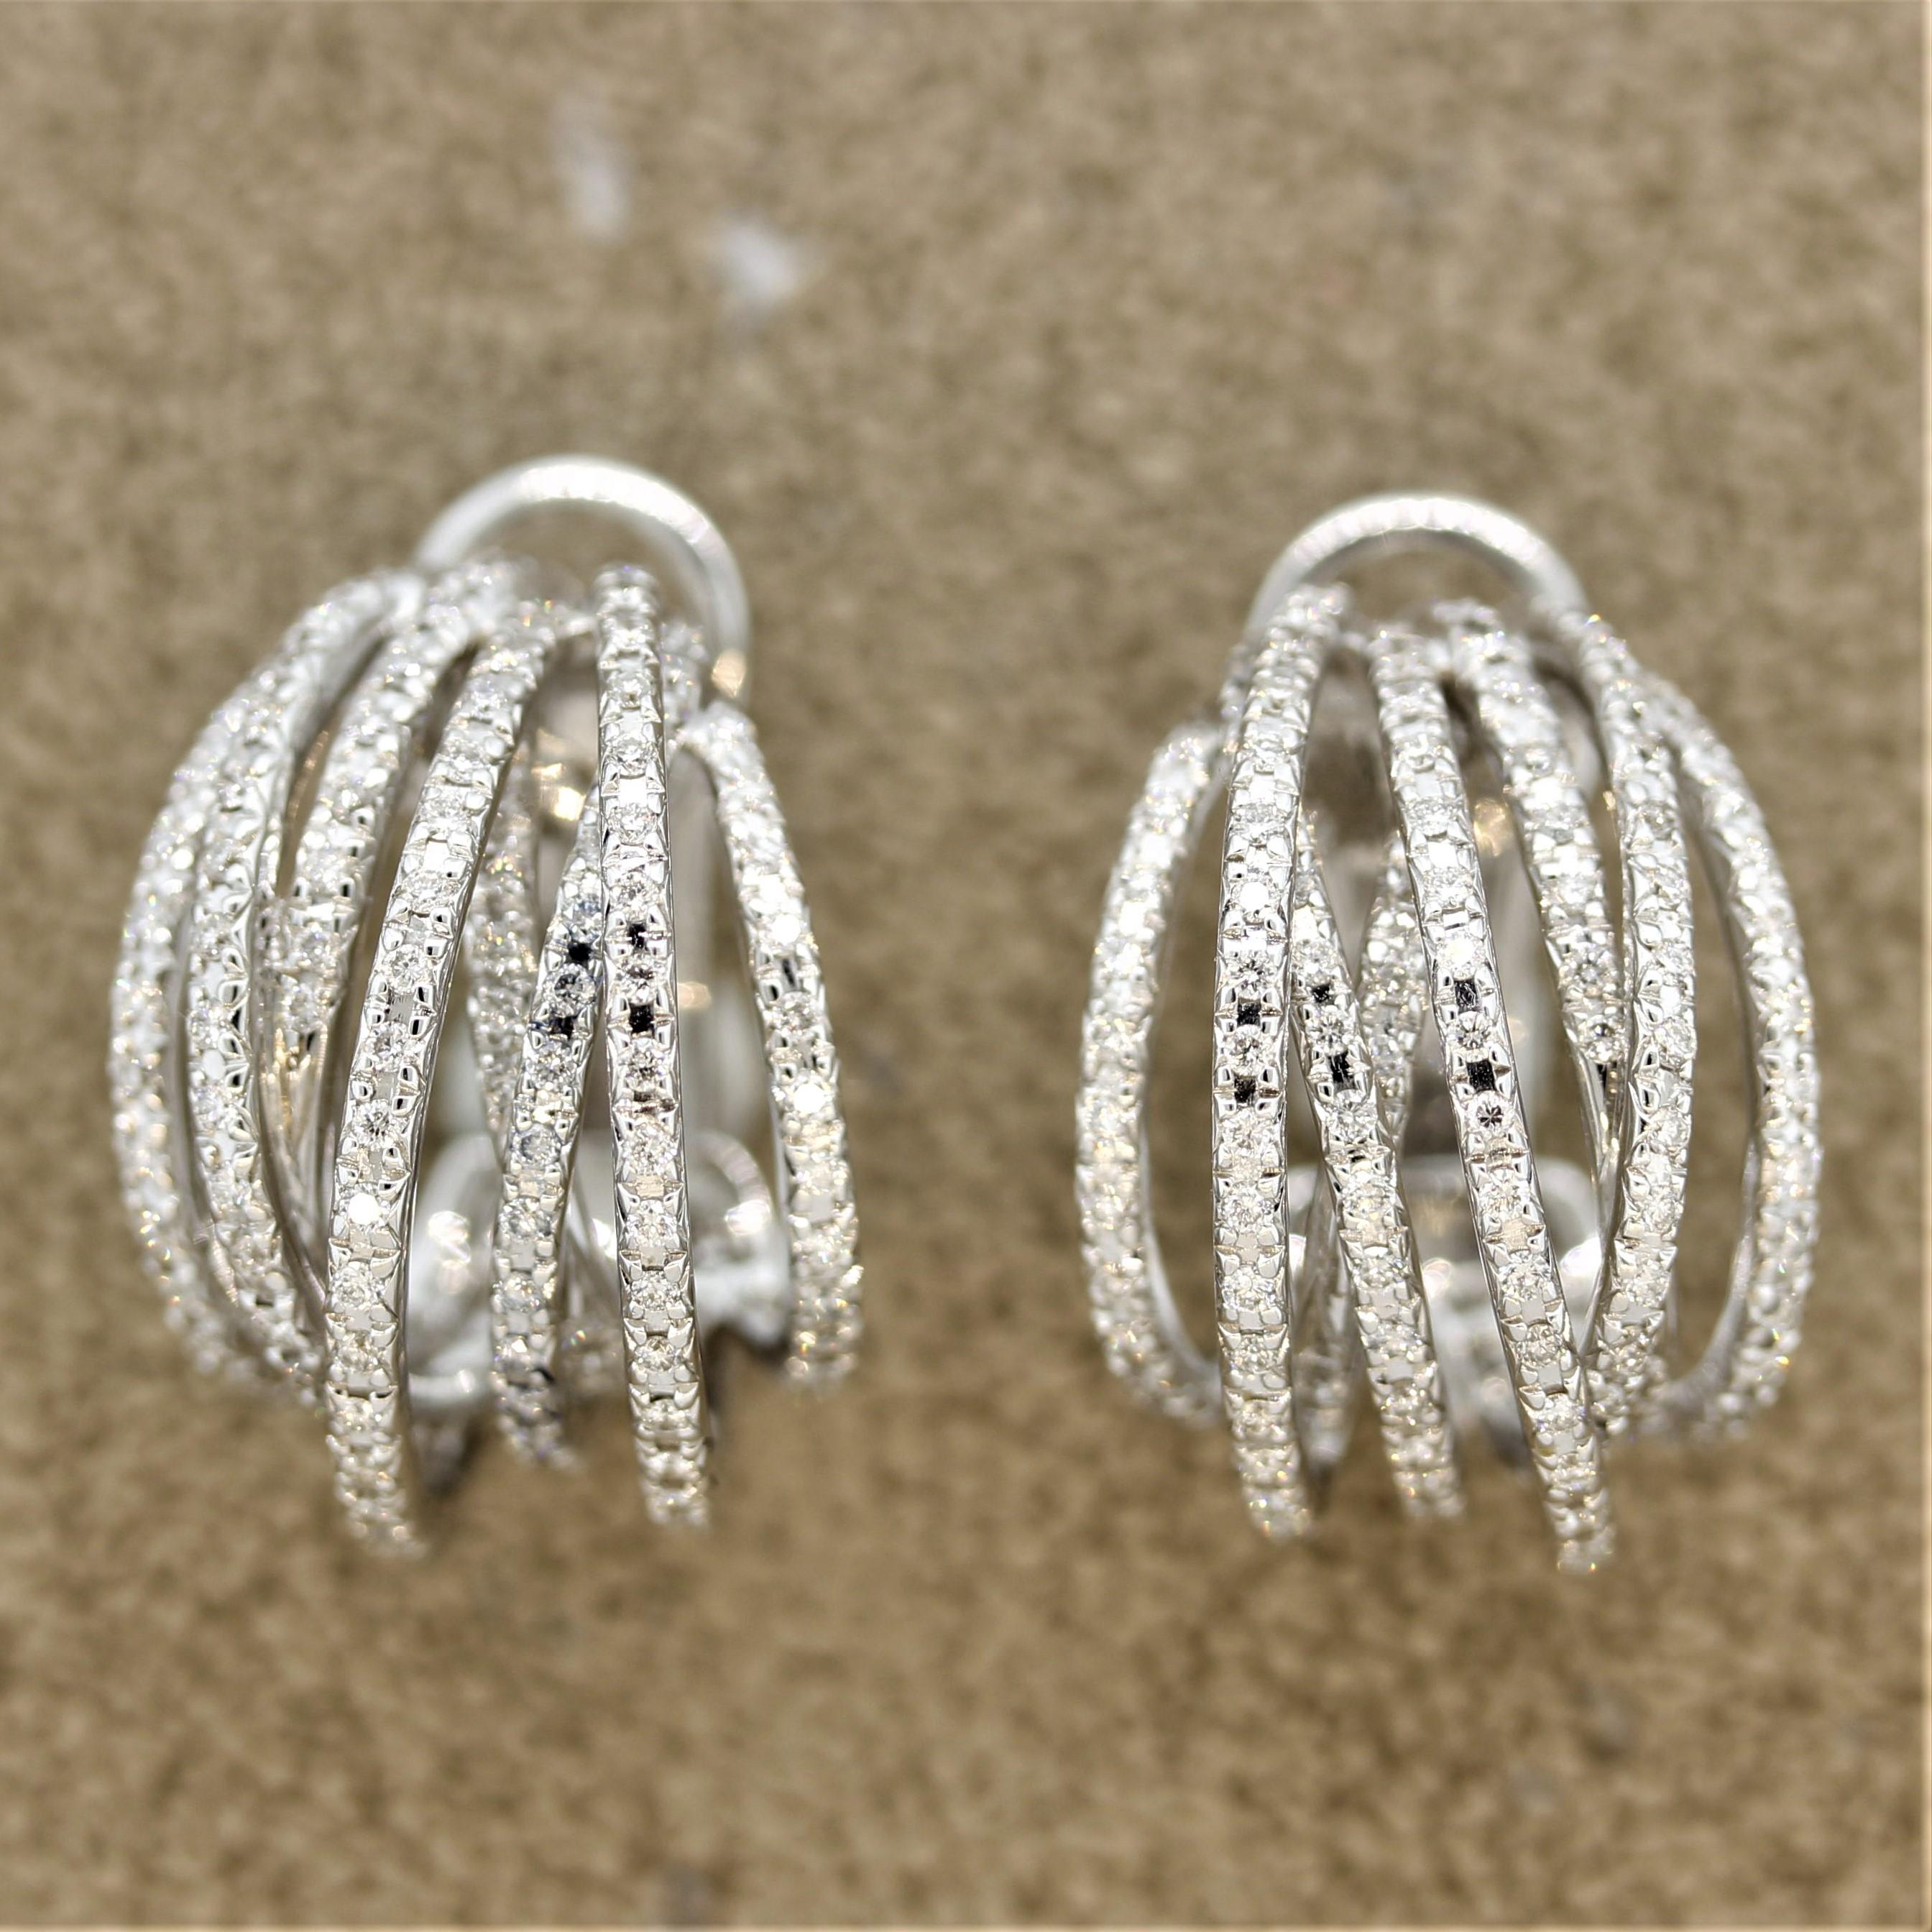 A lovely pair of earrings made in 18k white gold. They feature 1.76 carats or round brilliant cut diamonds which are set one after another over lines of white gold which crossover each other. This adds dimension to the stylish earrings. Made in 18k